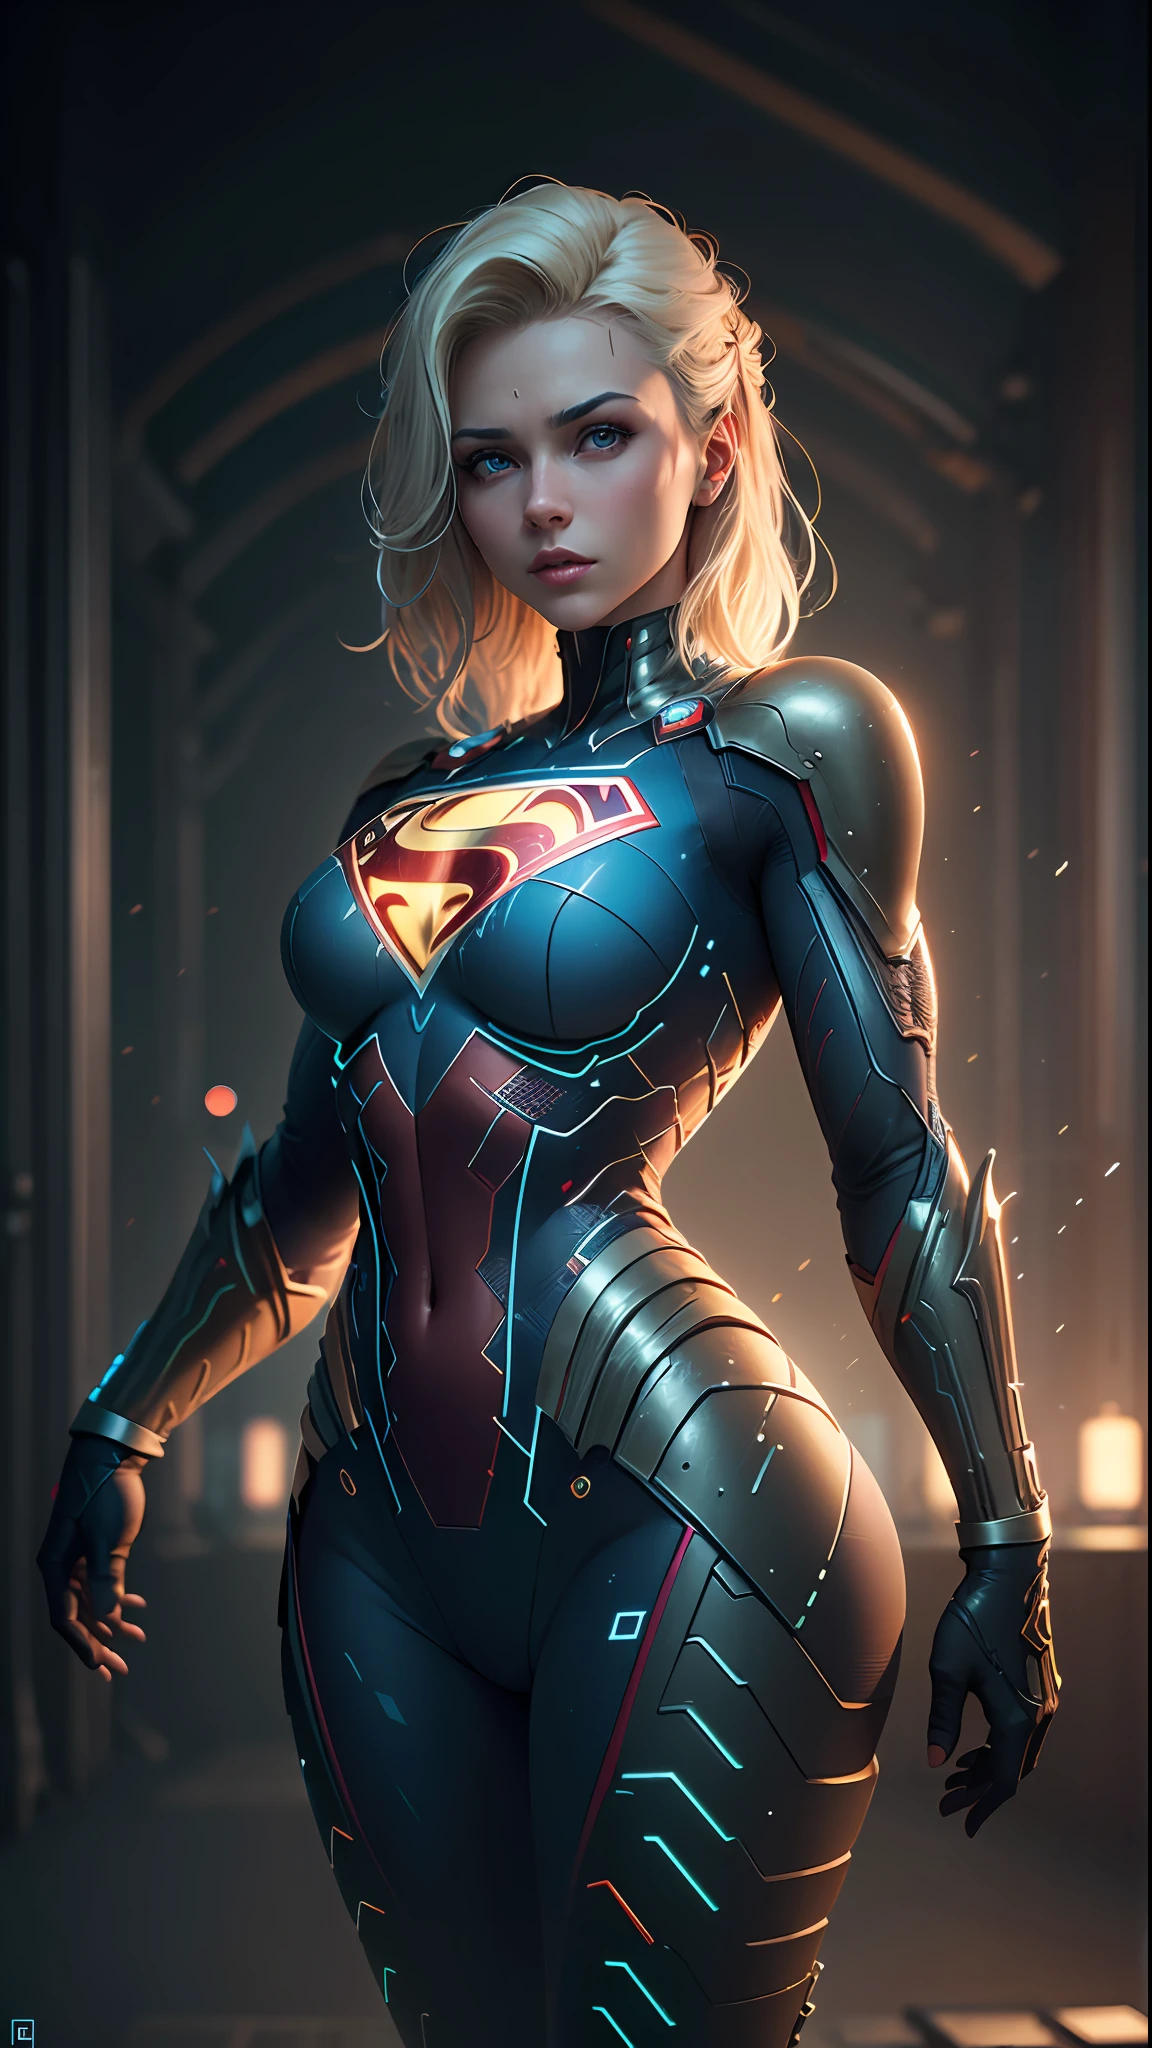 ((Best Quality)), ((Masterpiece)), (Detailed: 1.4), 3D, an image of a beautiful cyberpunk Supergirl,HDR (High Dynamic Range),Ray Tracing,NVIDIA RTX,Super-Resolution,Unreal 5,Subsurface Dispersion, PBR Texture, Post-processing, Anisotropic Filtering, Depth of Field, Maximum Clarity and Sharpness, Multilayer Textures, Albedo and Specular Maps, Surface Shading, Accurate Simulation of Light-Material Interaction, Perfect Proportions, Octane Render,  Two-Tone Lighting,Wide Aperture,Low ISO,White Balance,Rule of Thirds,8K RAW,CircuitBoardAI, Blonde Hair, Blue Eyes, Superman Symbol on Chest.